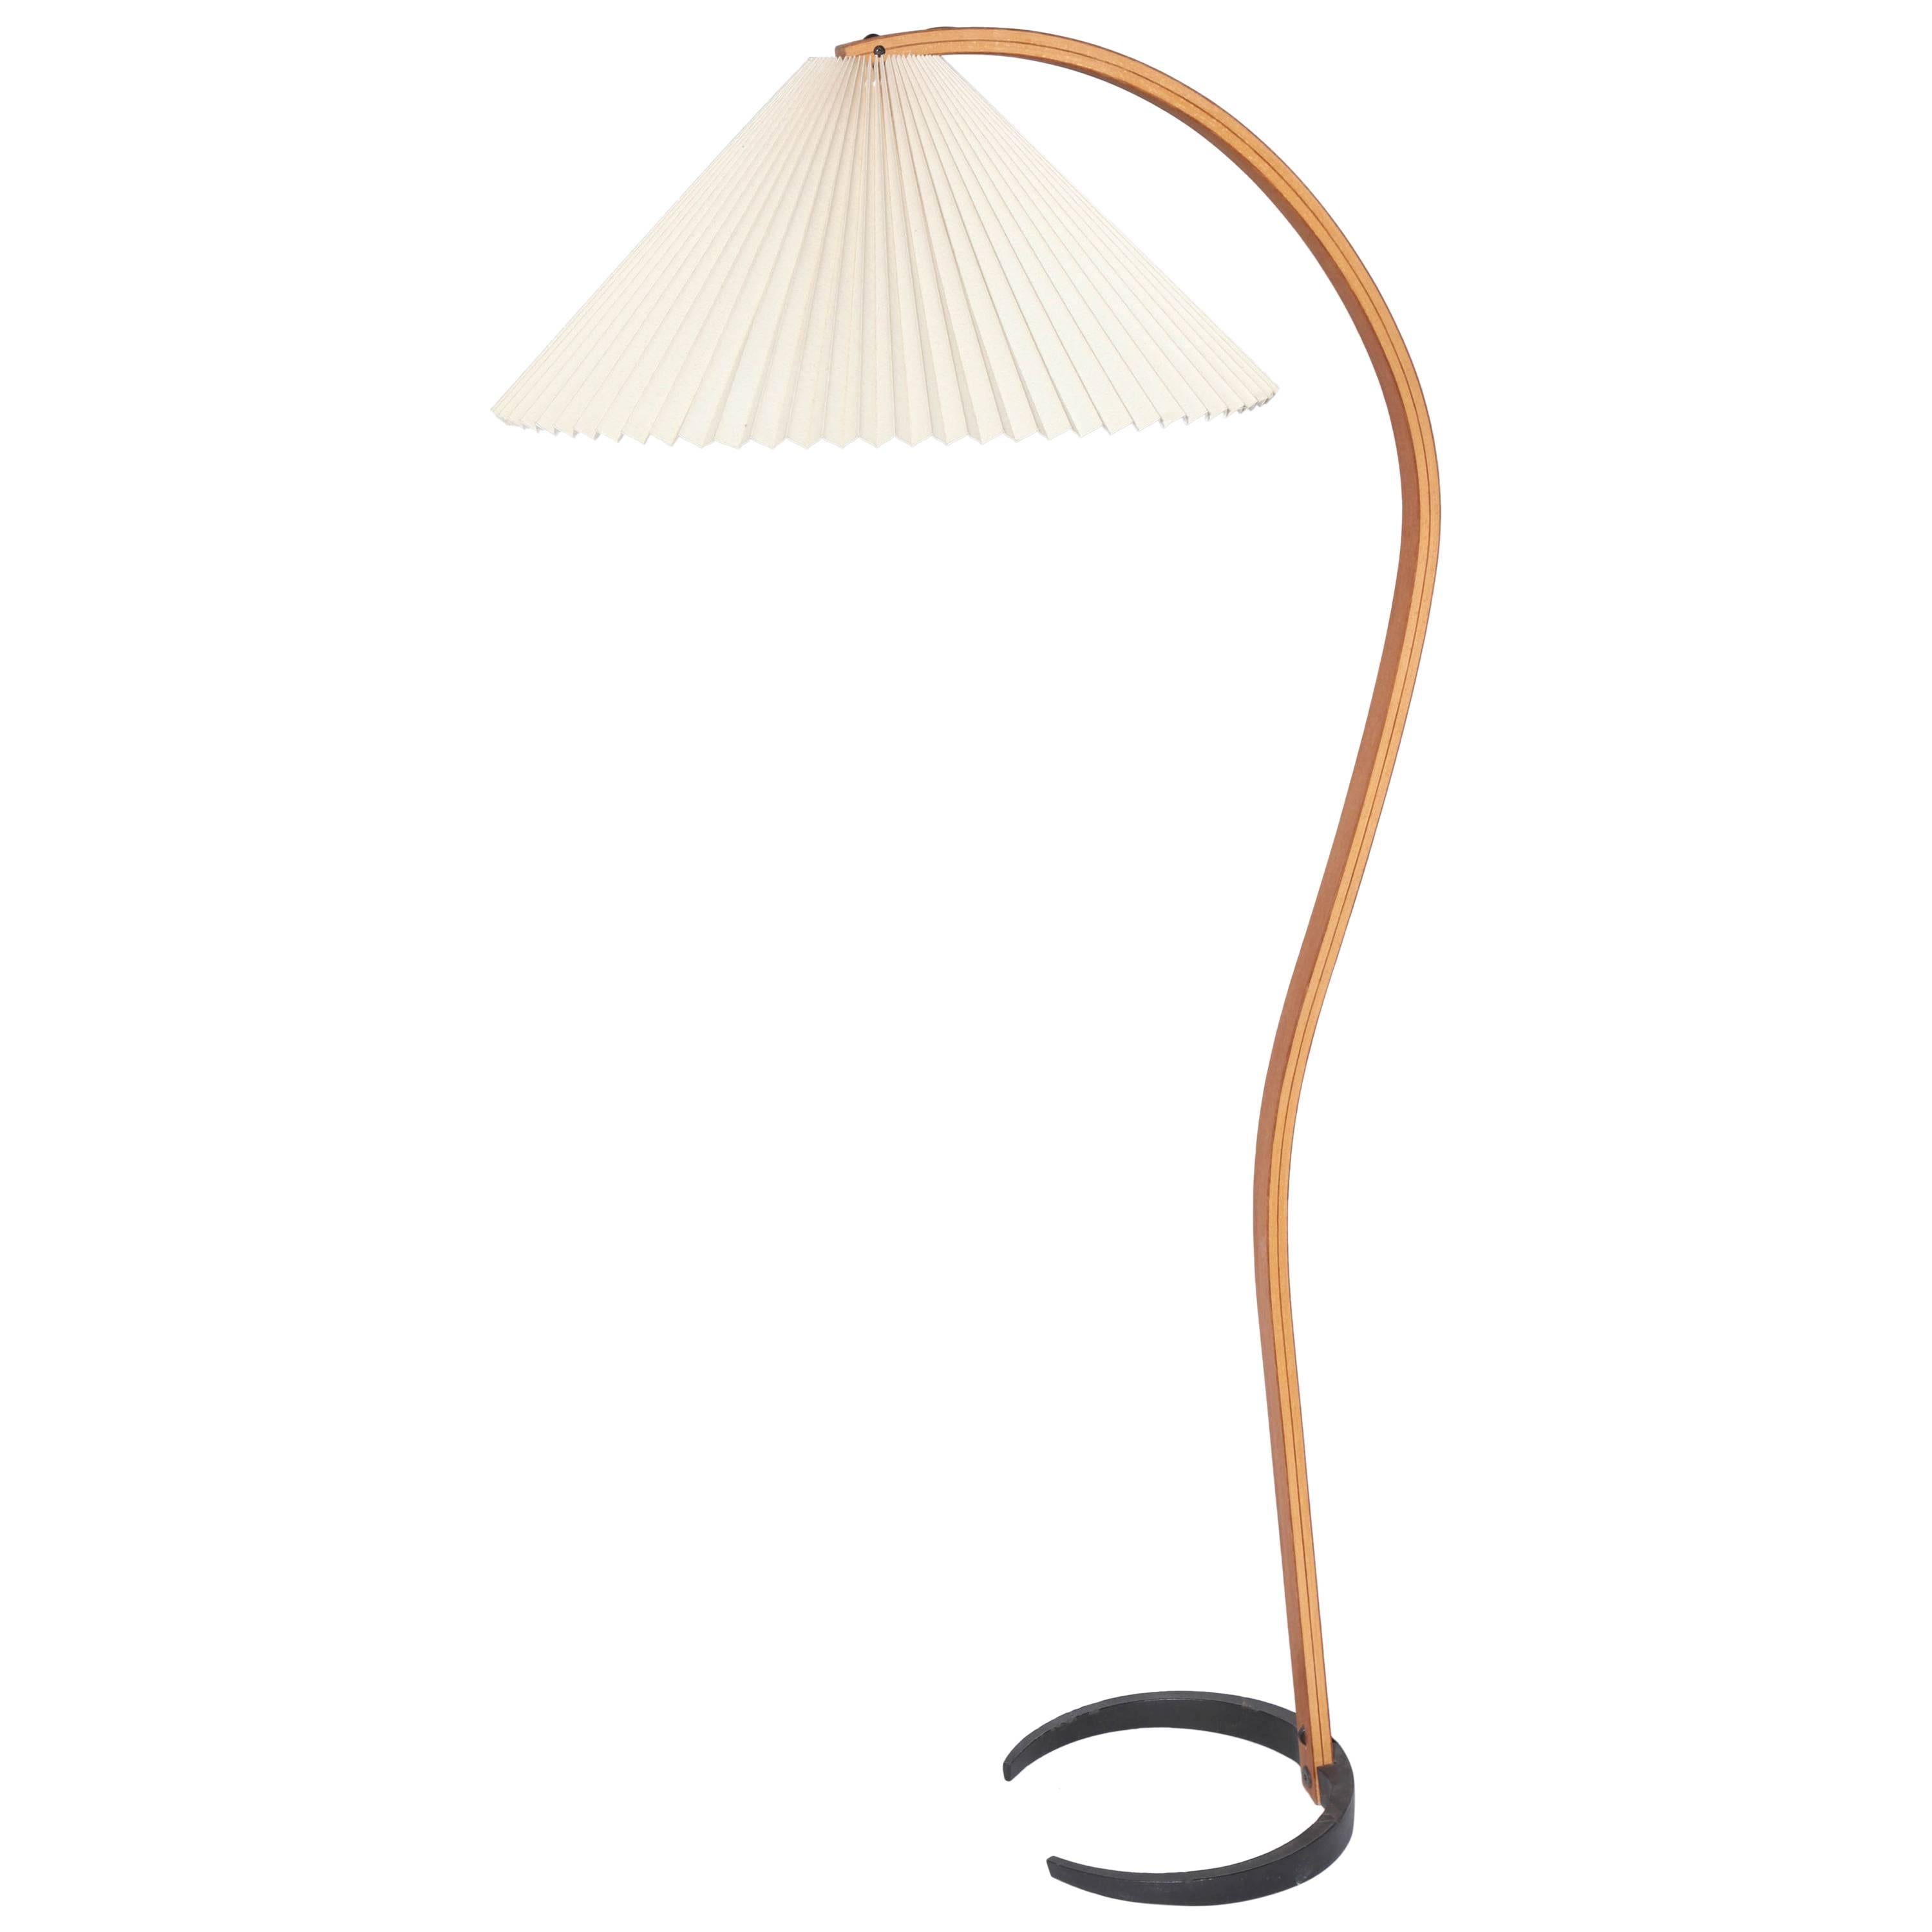 Early Mads Caprani Bentwood Floor Lamp